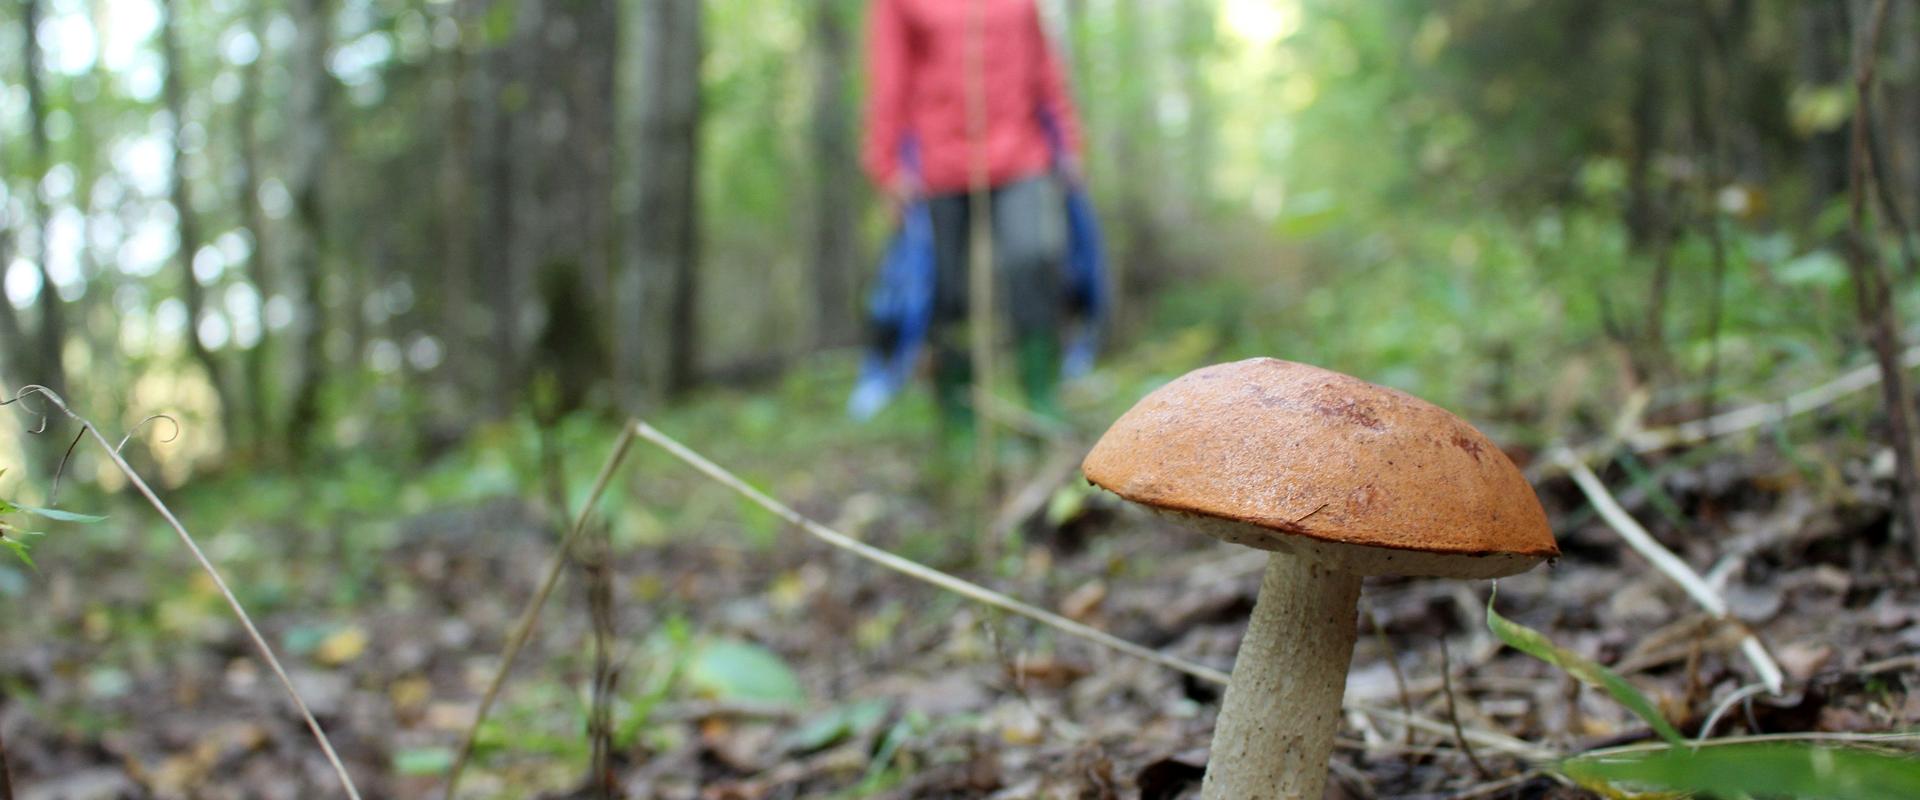 We are going to follow a local Soomaa tour guide to mushroom forests familiar to them in order to learn about various edible and inedible mushrooms. A